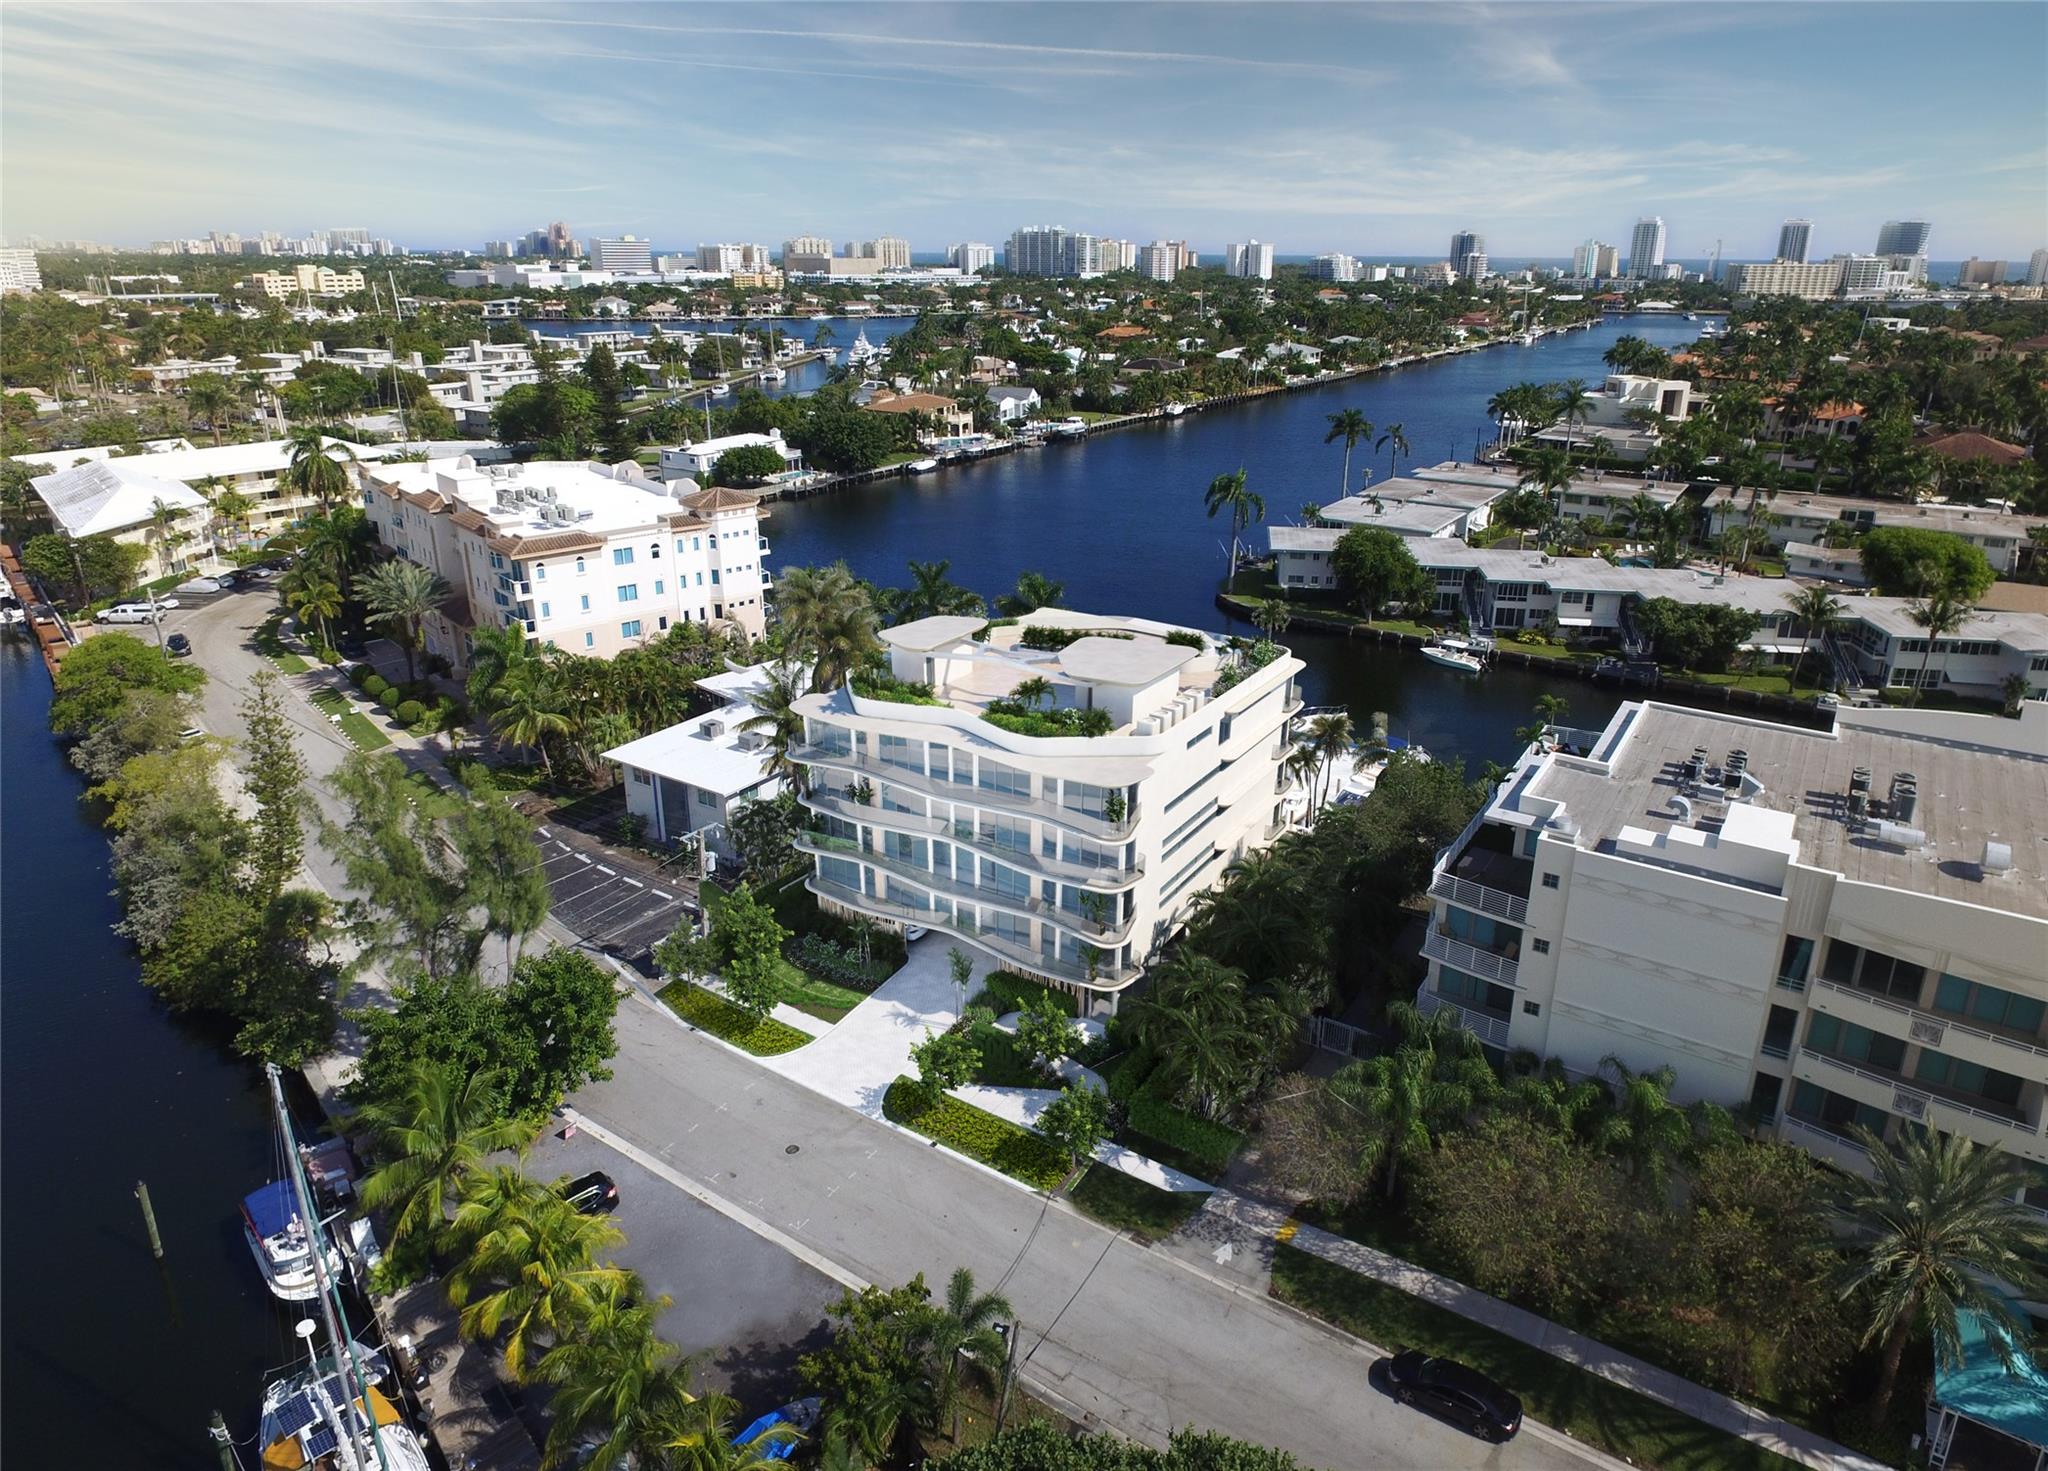 ** 100 FEET OF STRAIGHT LINE DOCKAGE IS INLCUDED WITH THE PENTHOUSE ** NO FIXED BRIDGES TO THE INTRACOASTAL & OCEAN.  LUMIERE, Fort Lauderdale's newest intimate waterfront enclave. A new level of modern architecture and luxury enhanced by a flow through open floor plan, volume ceilings and luminous spaces with floor to ceiling walls of glass with expansive waterway views. The Epicurean kitchen is outfitted with European cabinetry, state-of-the-art appliances, a gas cooktop and 234 bottle wine storage for the avid collector. Enjoy the resort inspired lifestyle by the waterside pool, rooftop terrace and fitness center. Elevated living with smart technology, EV charging, a dedicated storage unit and a Luxor package storage unit with a refrigerated compartment. Square. Footage from developer.